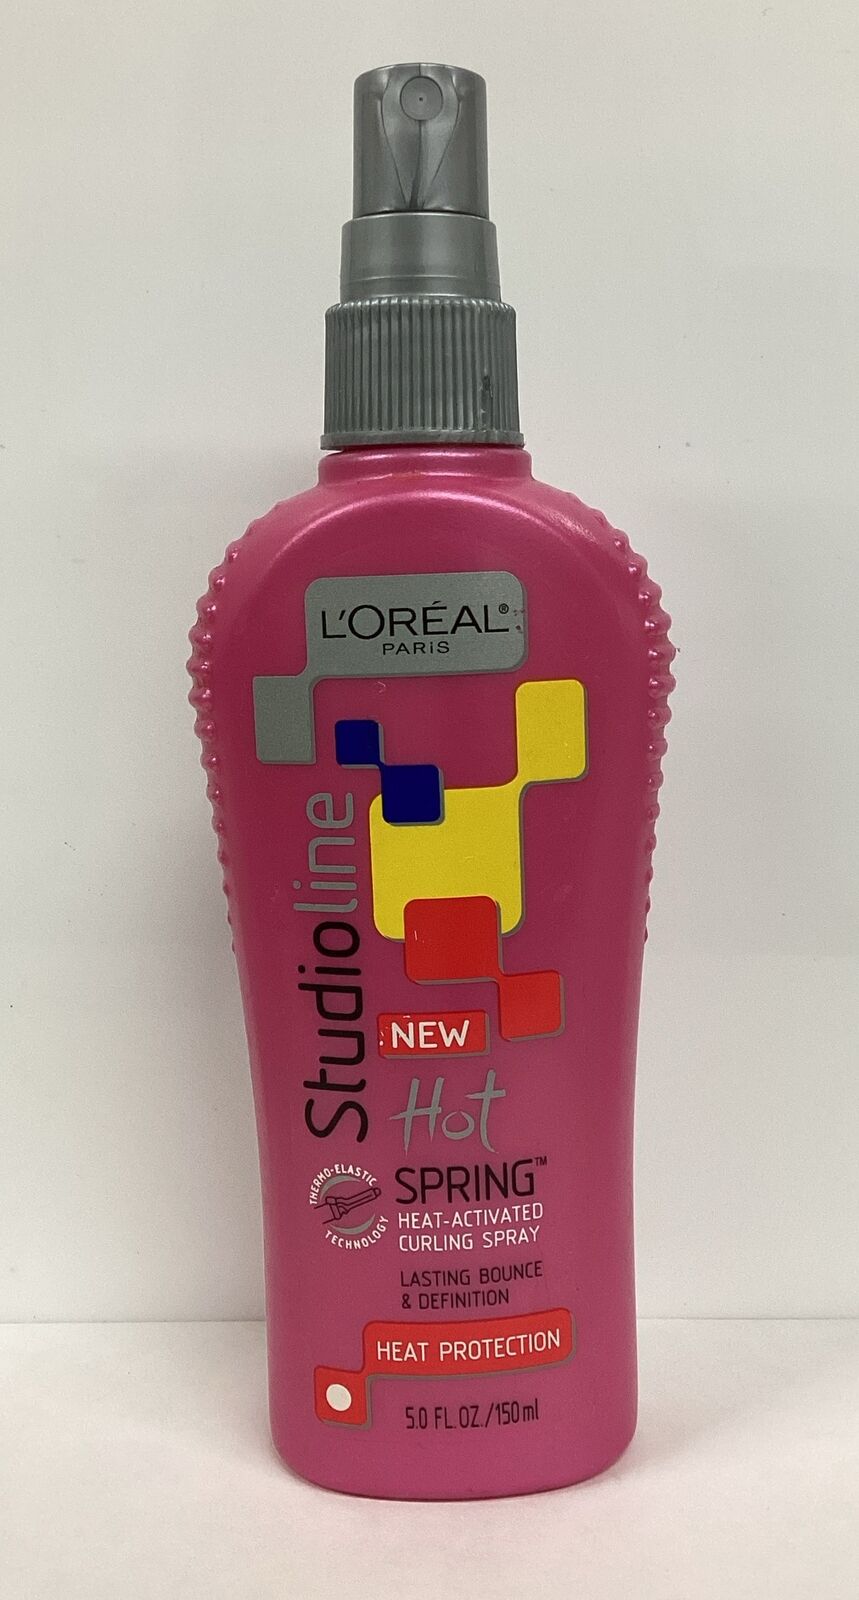 L'oreal HOT SPRING Heat-Activated Curling Spray, Lasting Bounce & Definition 5oz